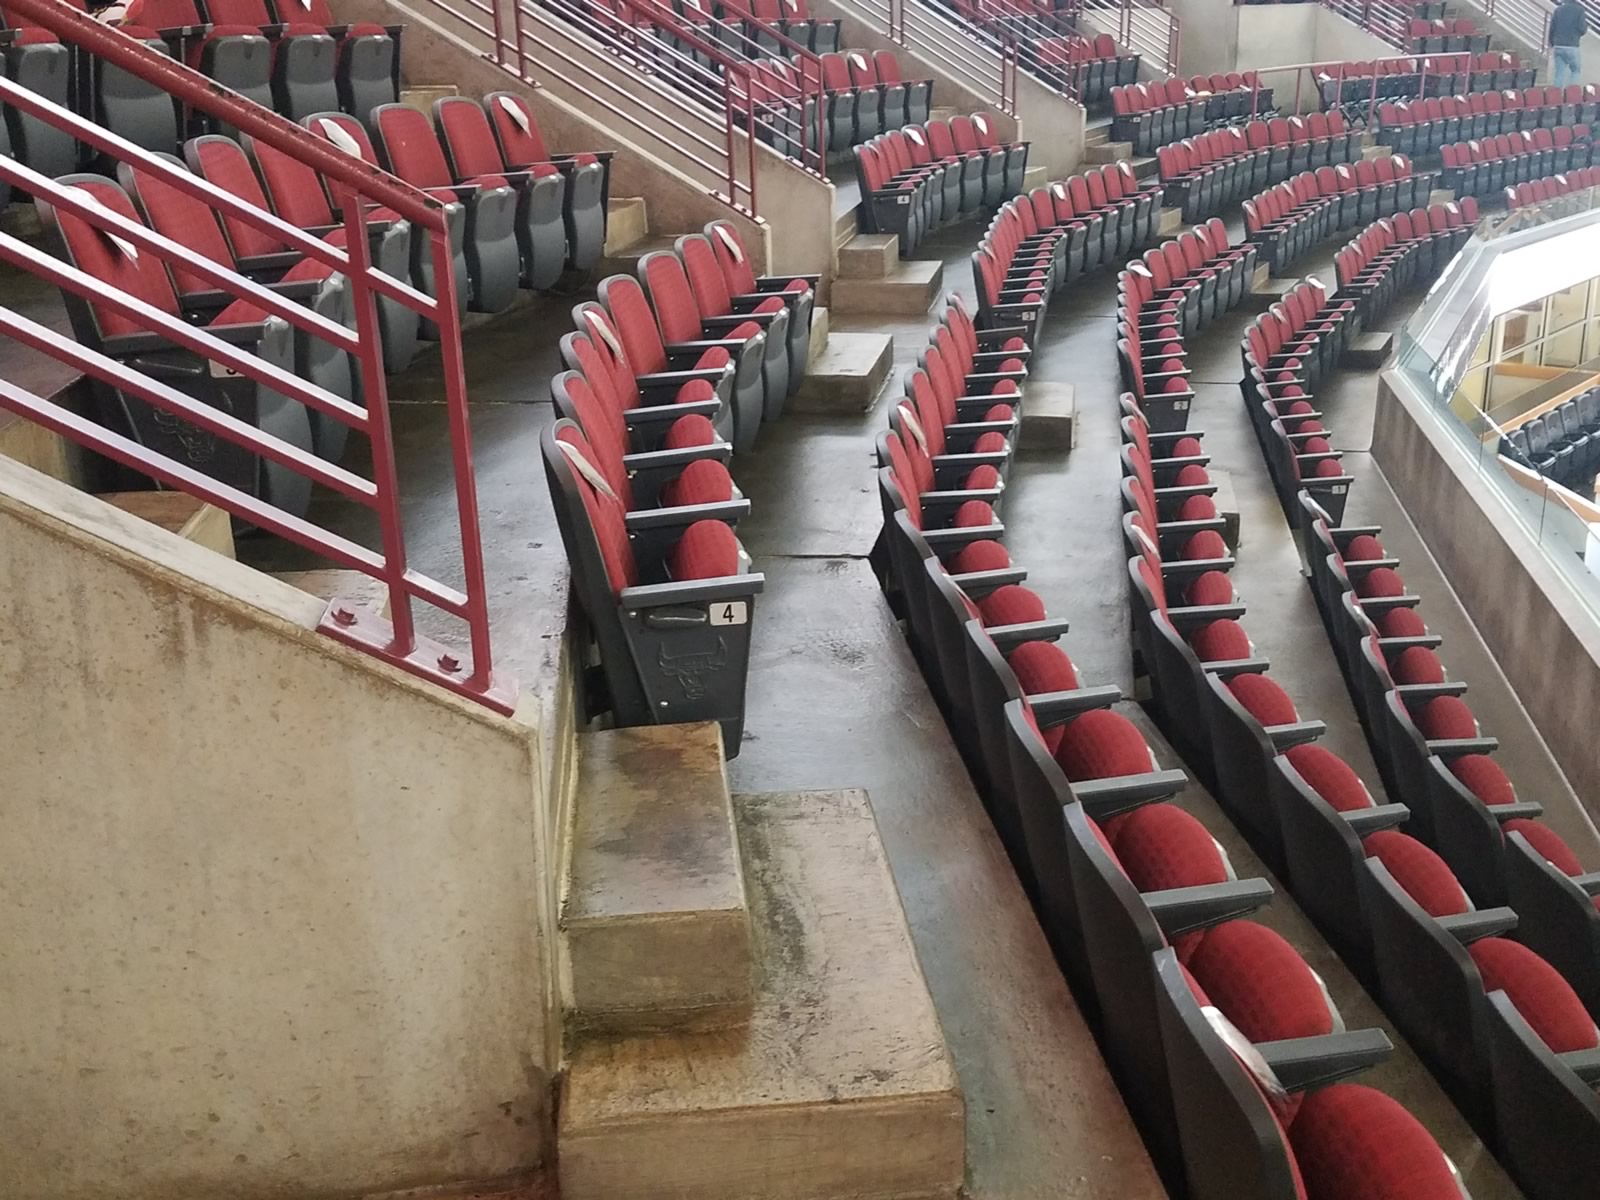 What Are Club Level Seats At United Center Brokeasshome com